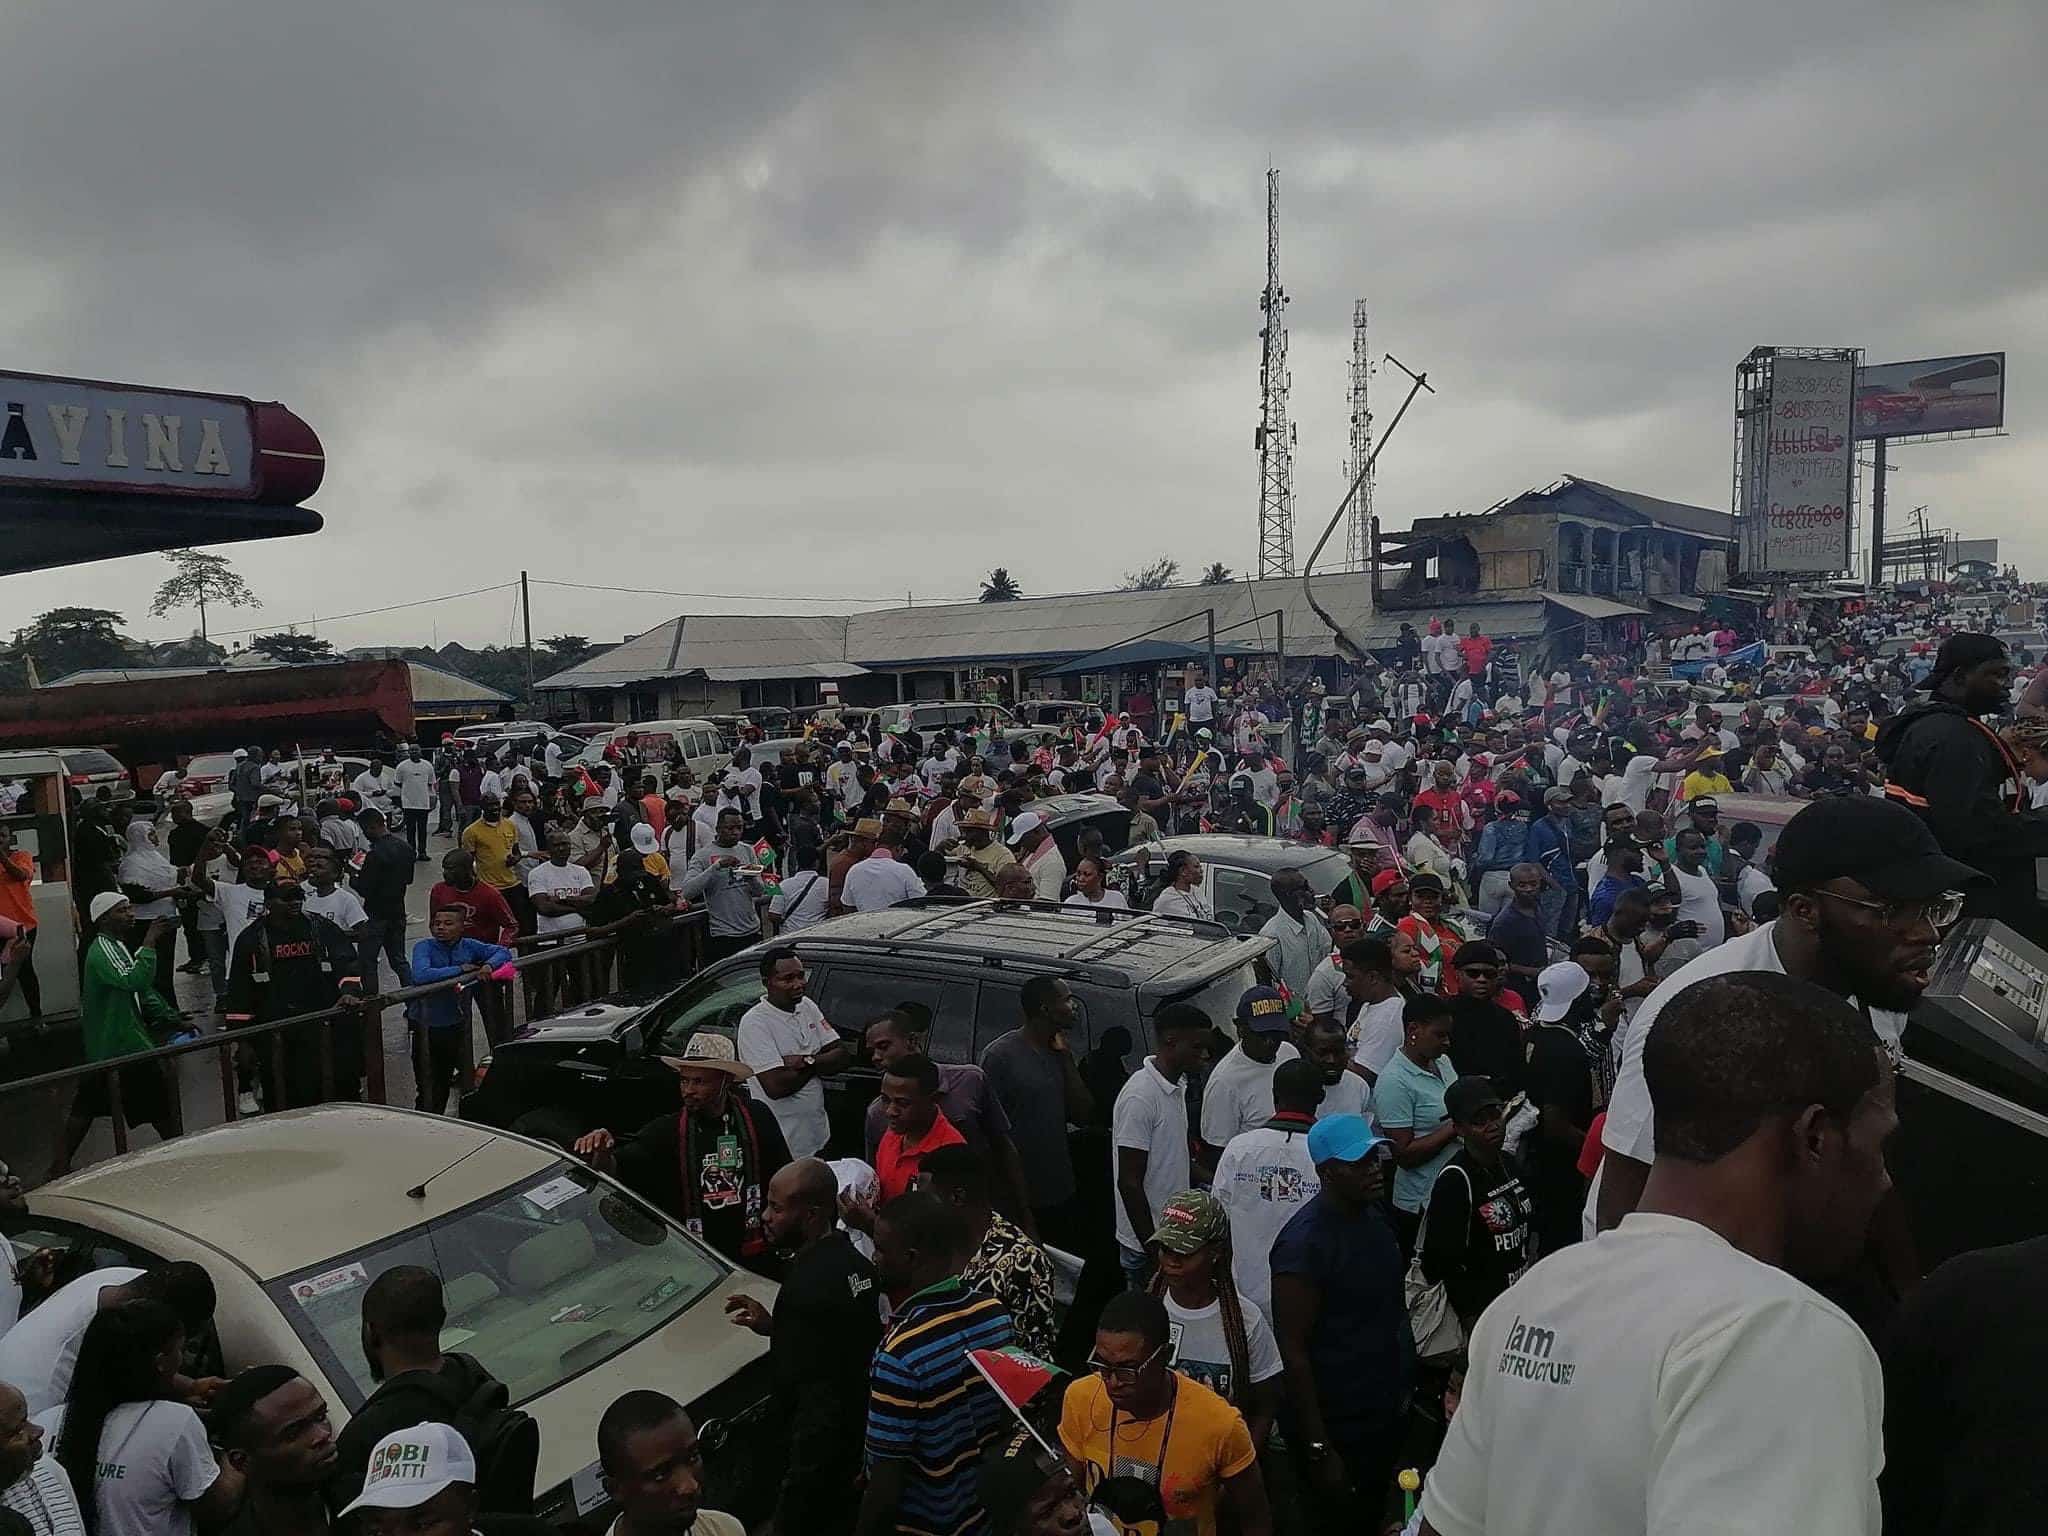 Peter Obi Reacts As Supporters Defy Rain To Stage 2-Million Man March In Port Harcourt (Photos And Video)